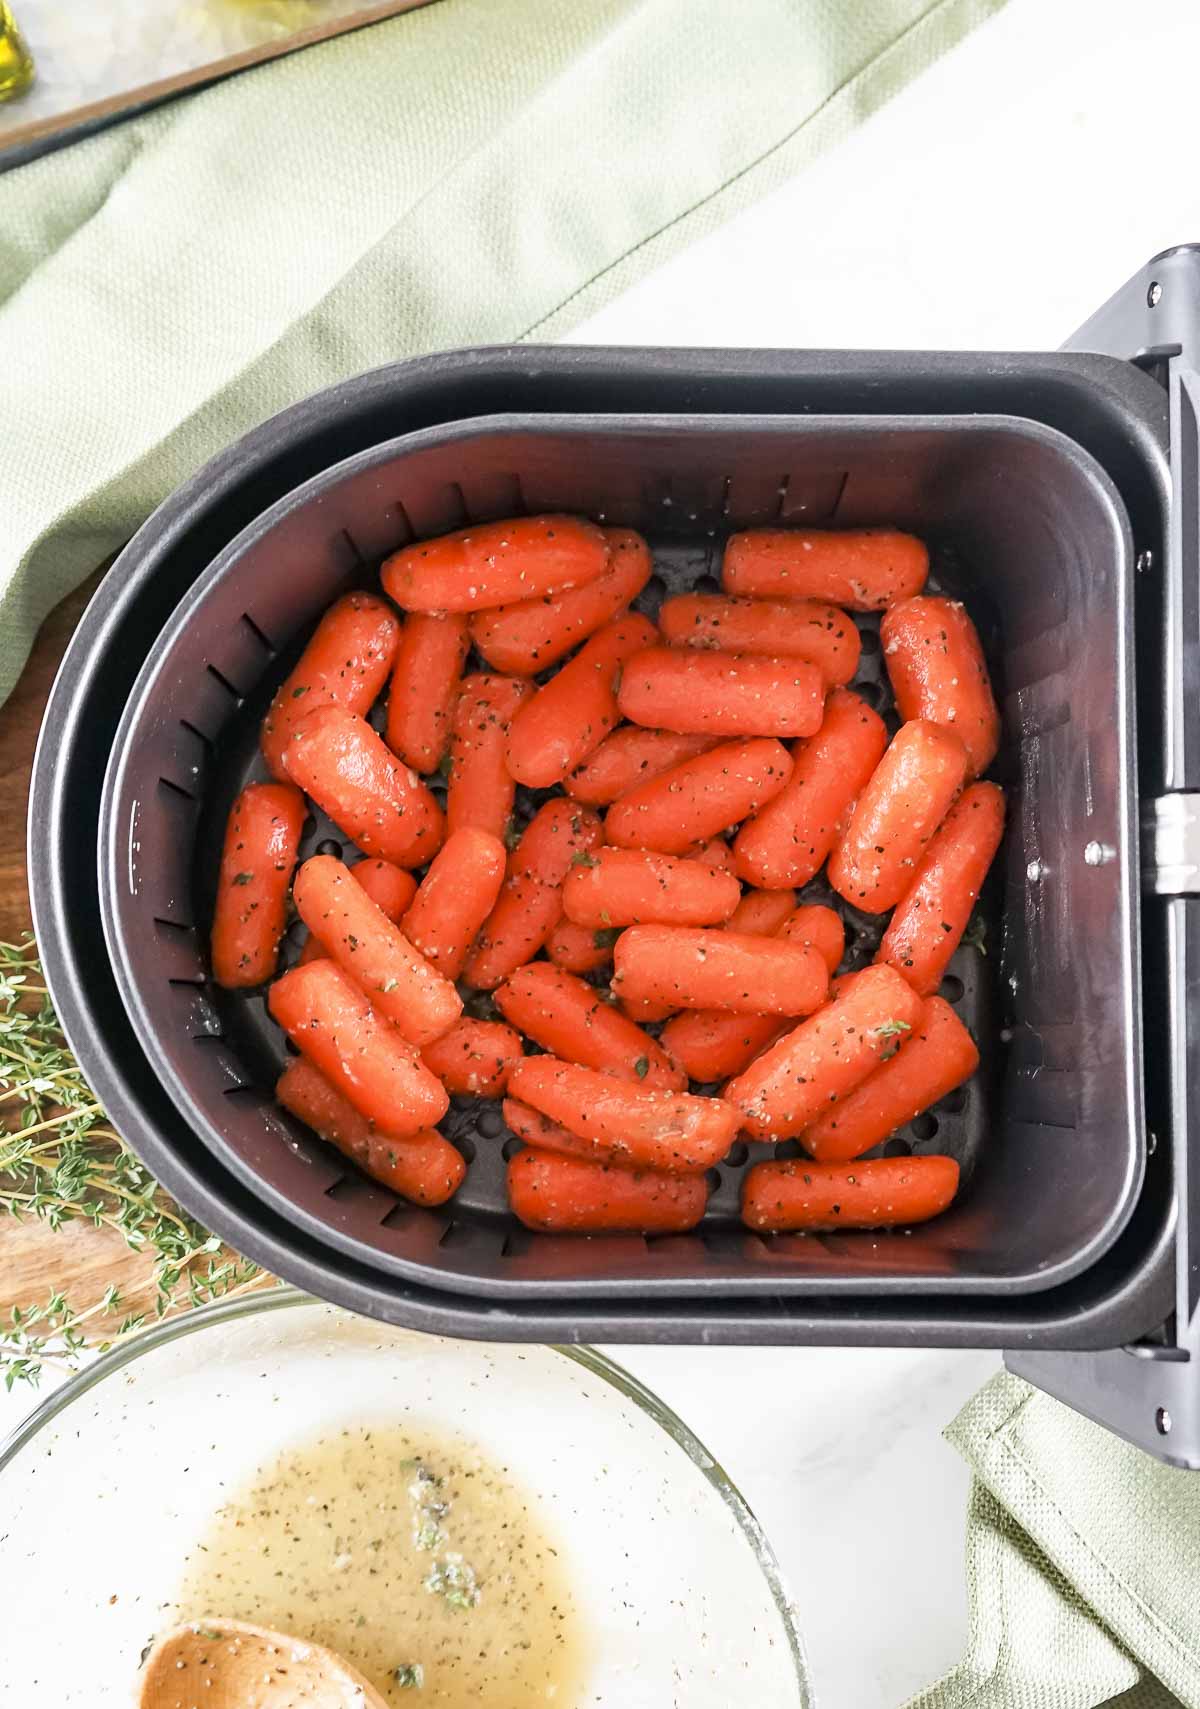 Glazed carrots placed in the air fryer basket.